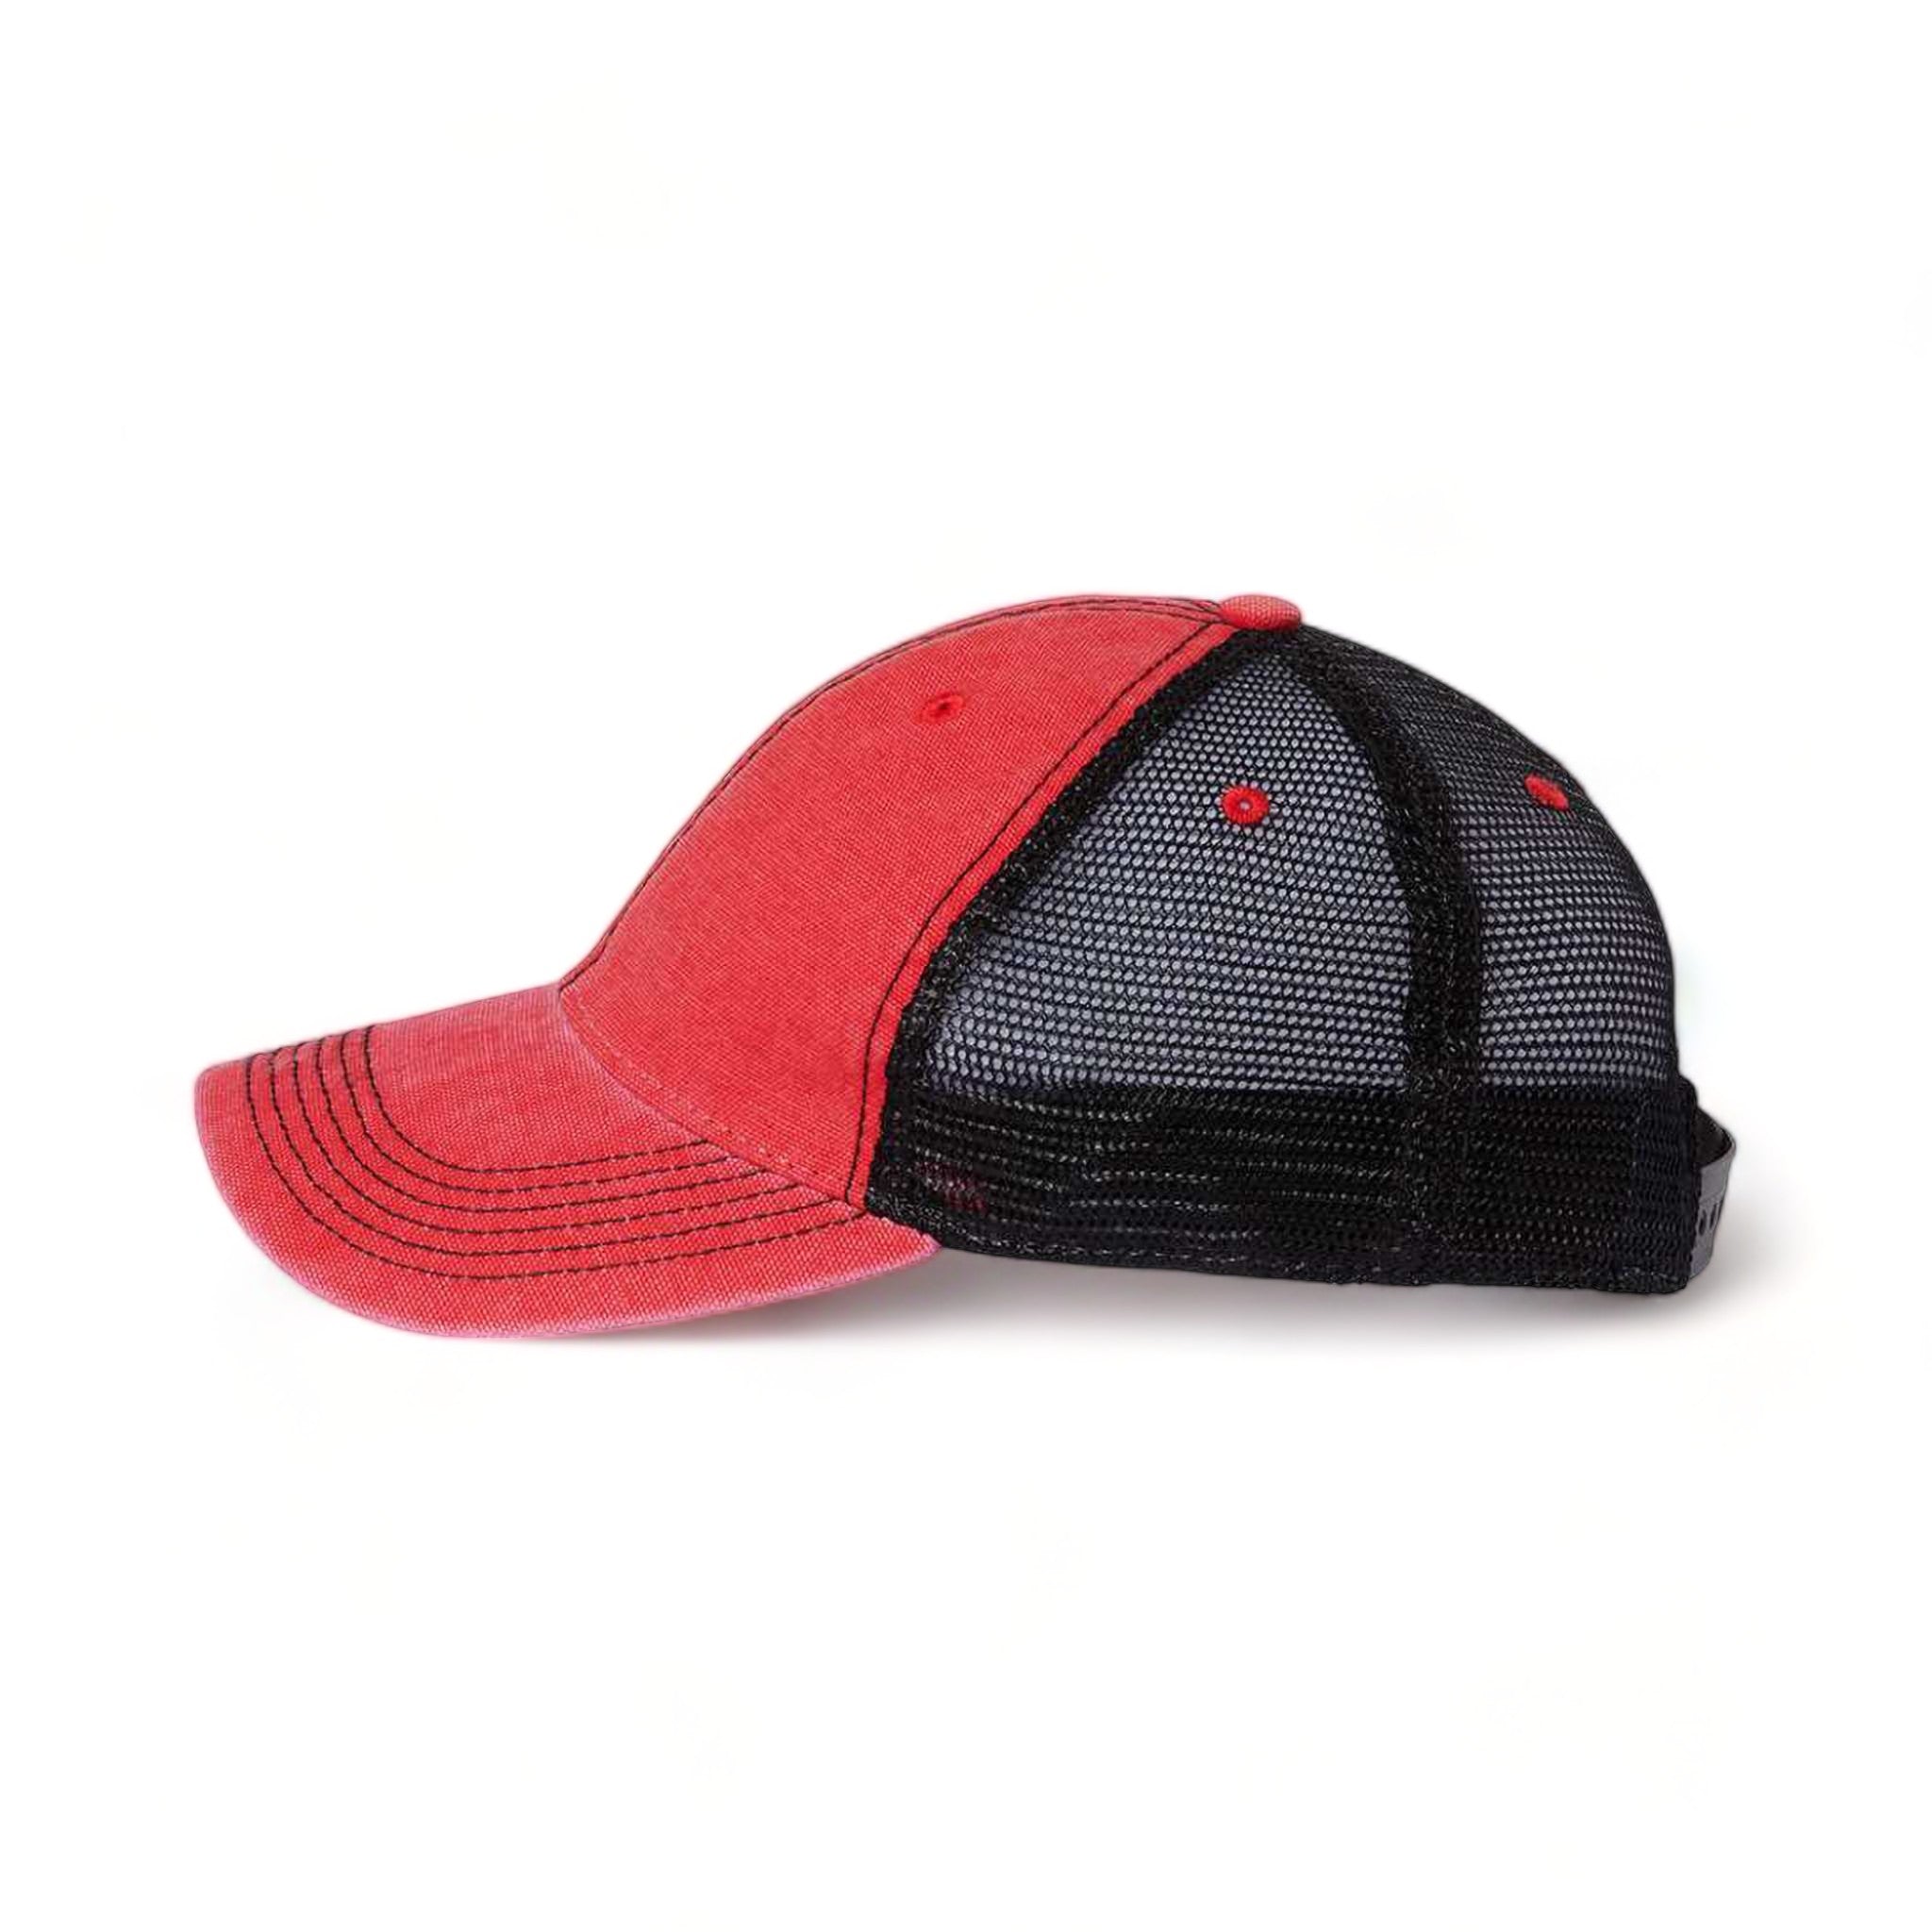 Side view of LEGACY DTA custom hat in scarlet red and black